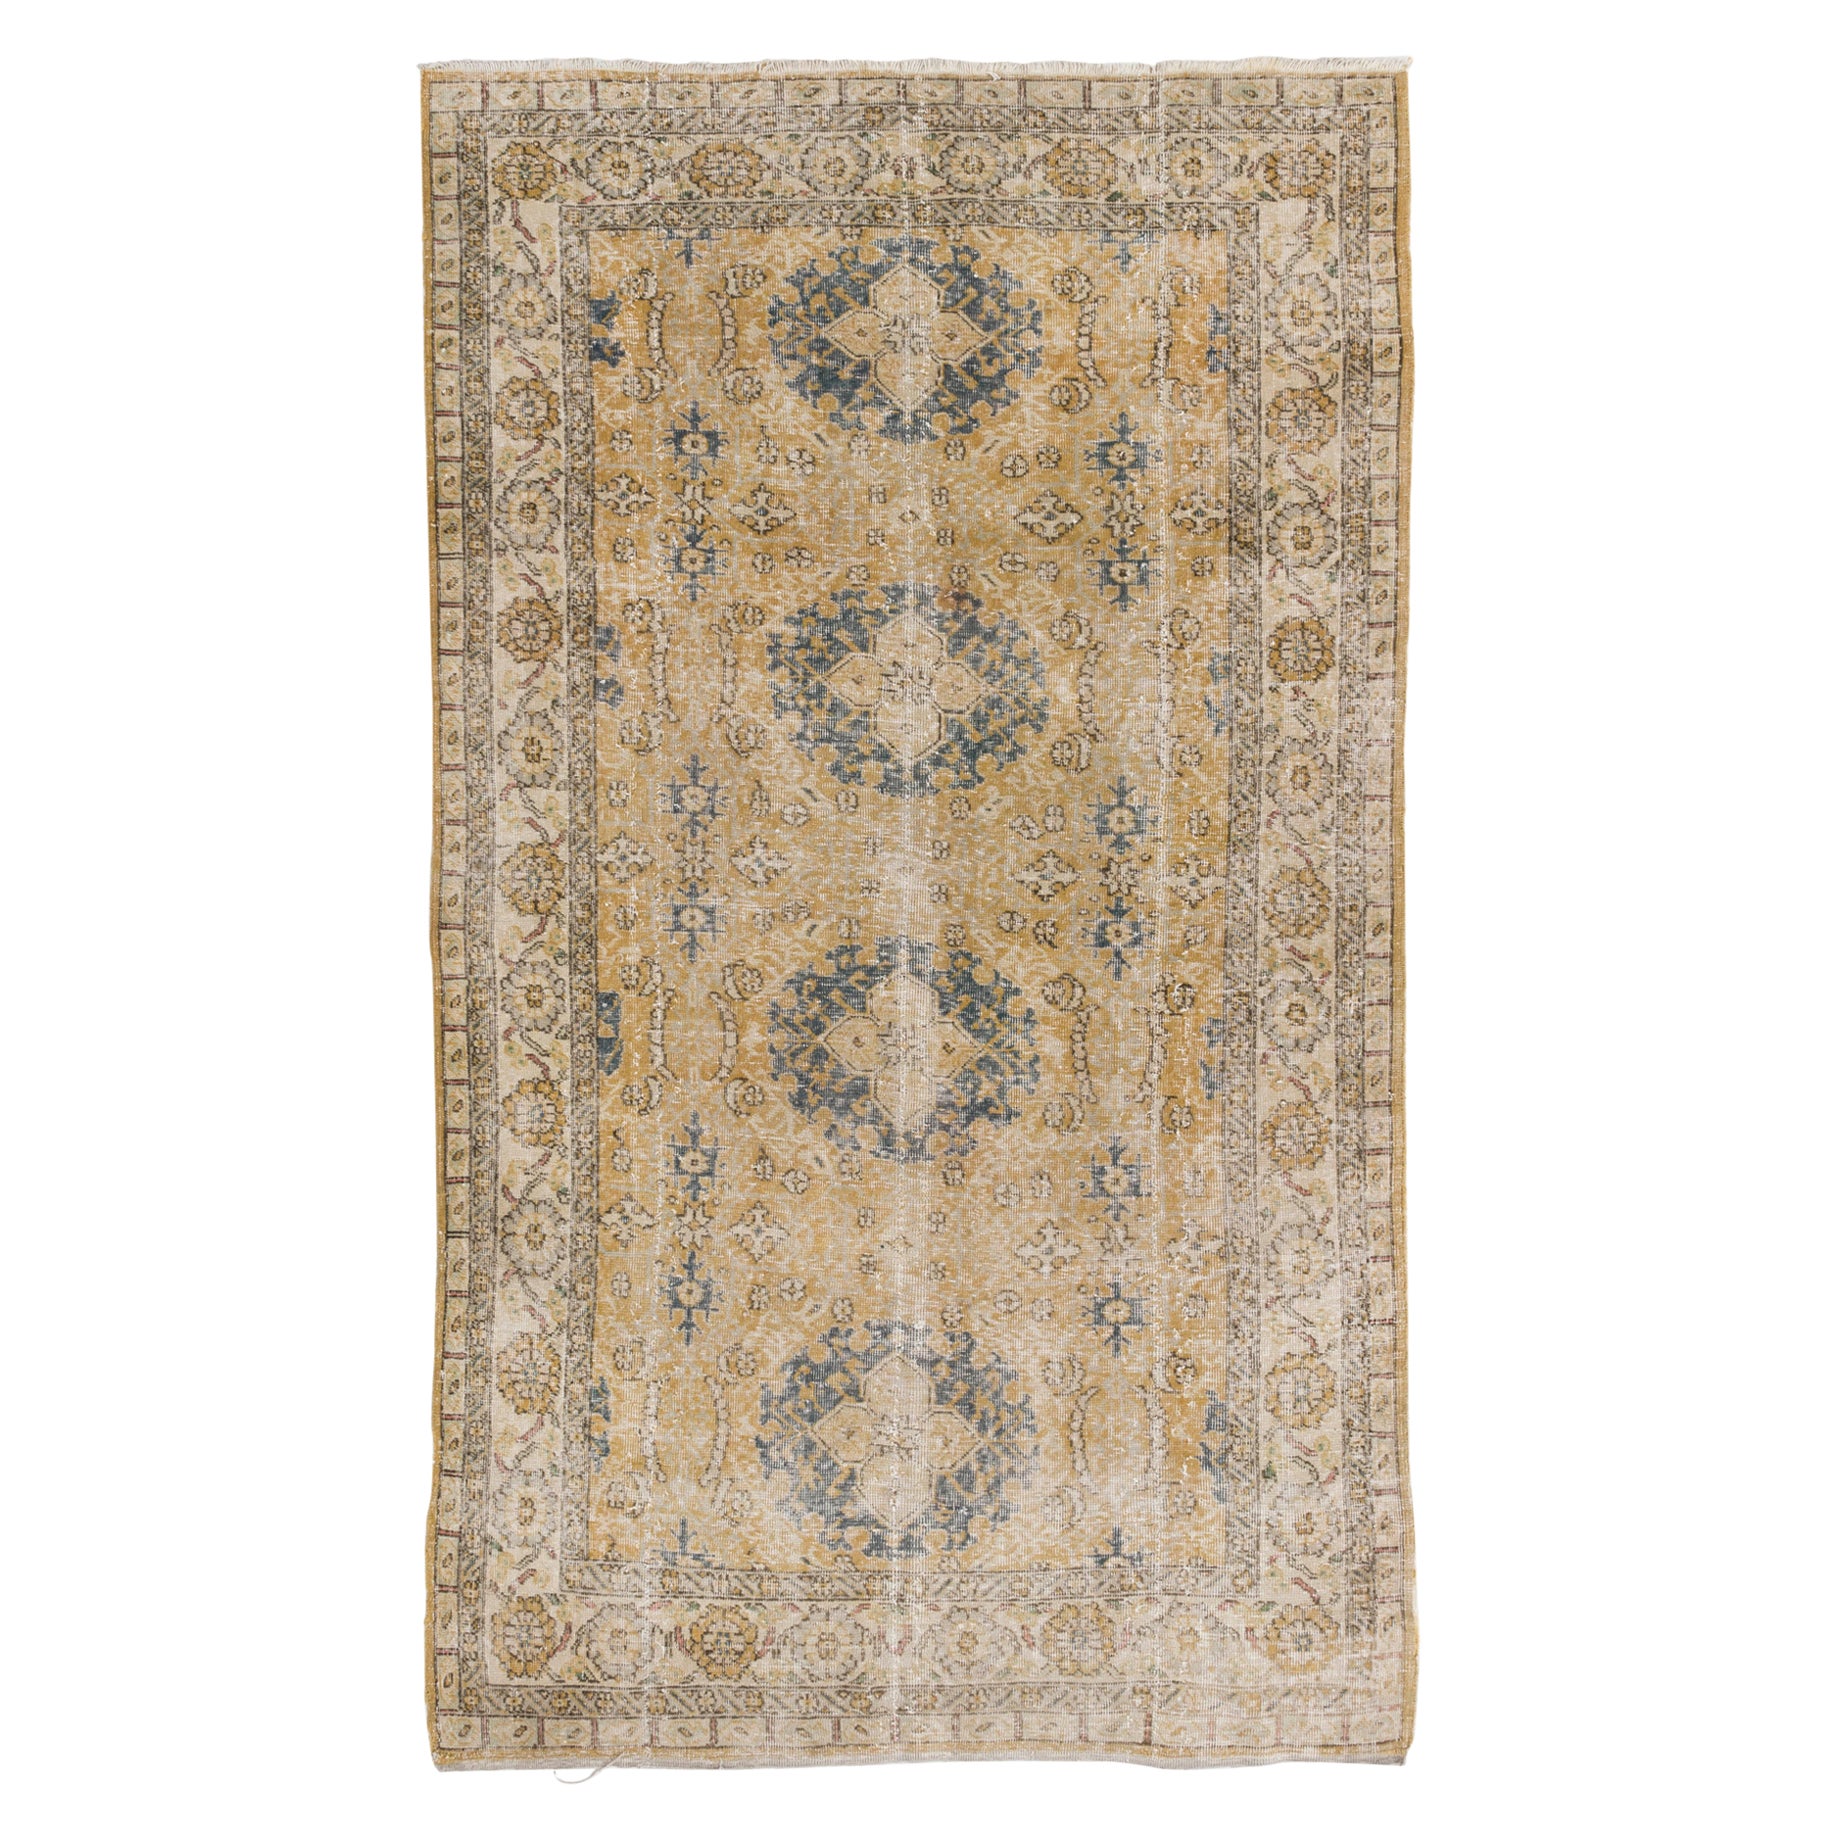 5x8 Ft Vintage Central Anatolian Area Rug, Shabby Chic Handmade Wool Carpet For Sale